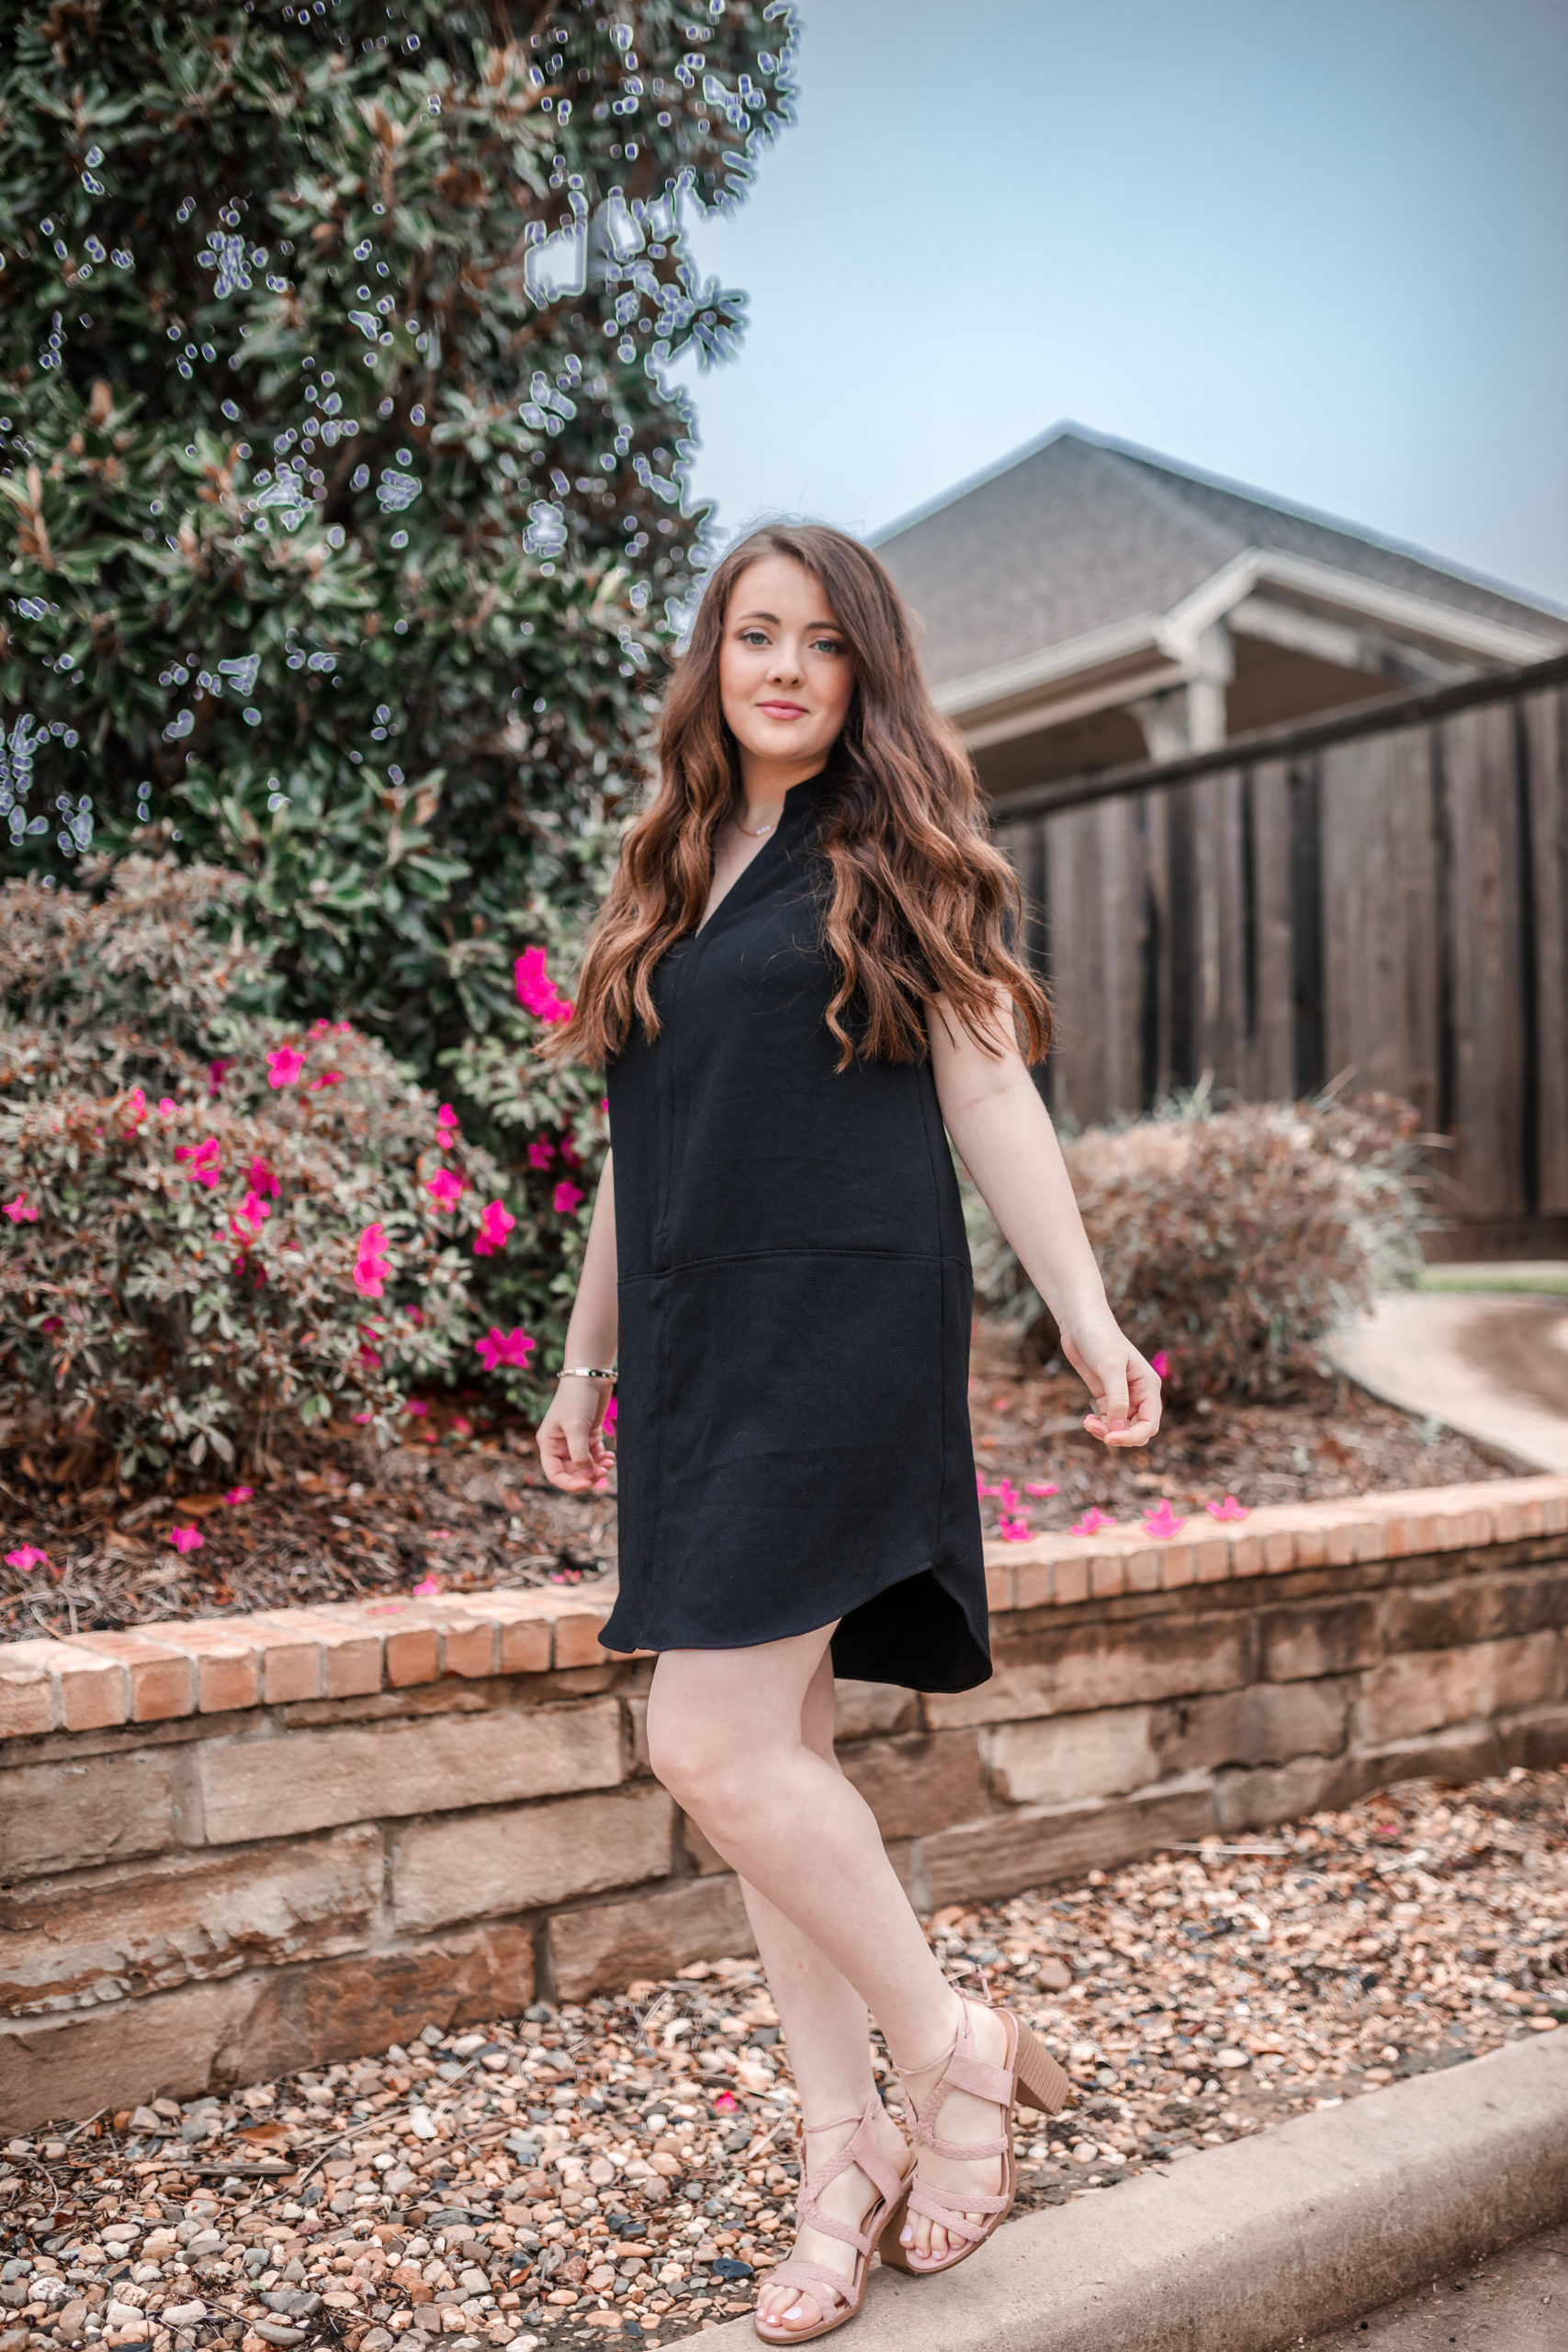 Styling A Little Black Dress Two Ways For Spring [Ft. ShoeDazzle]